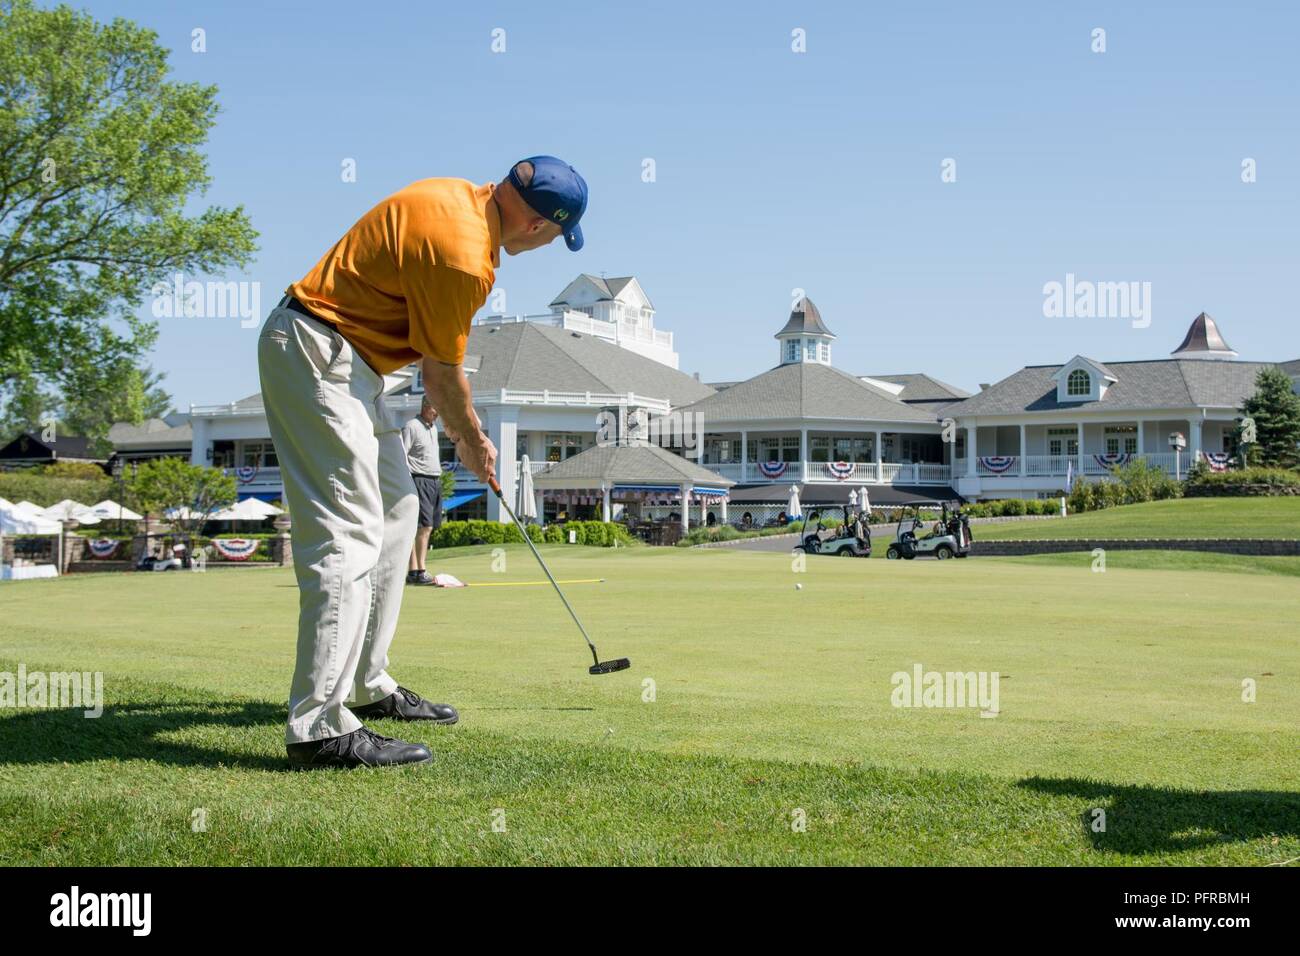 FARMINGDALE, N.J. (May 24, 2018) U.S. Marine Capt. Nathan McDonald putts on the green during the Honor Day 2018 Golf Tournament at Eagle Oaks Golf & Country Club, an event benefitting Hope For The Warriors, a non-profit organization, during the festivities of Fleet Week New York (FWNY). Now in its 30th year, FWNY is the city’s time-honored celebration of the sea services. It is an unparalleled opportunity for the citizens of New York and the surrounding tri-state area to meet Sailors, Marines and Coast Guardsmen, as well as witness firsthand the latest capabilities of today’s maritime services Stock Photo